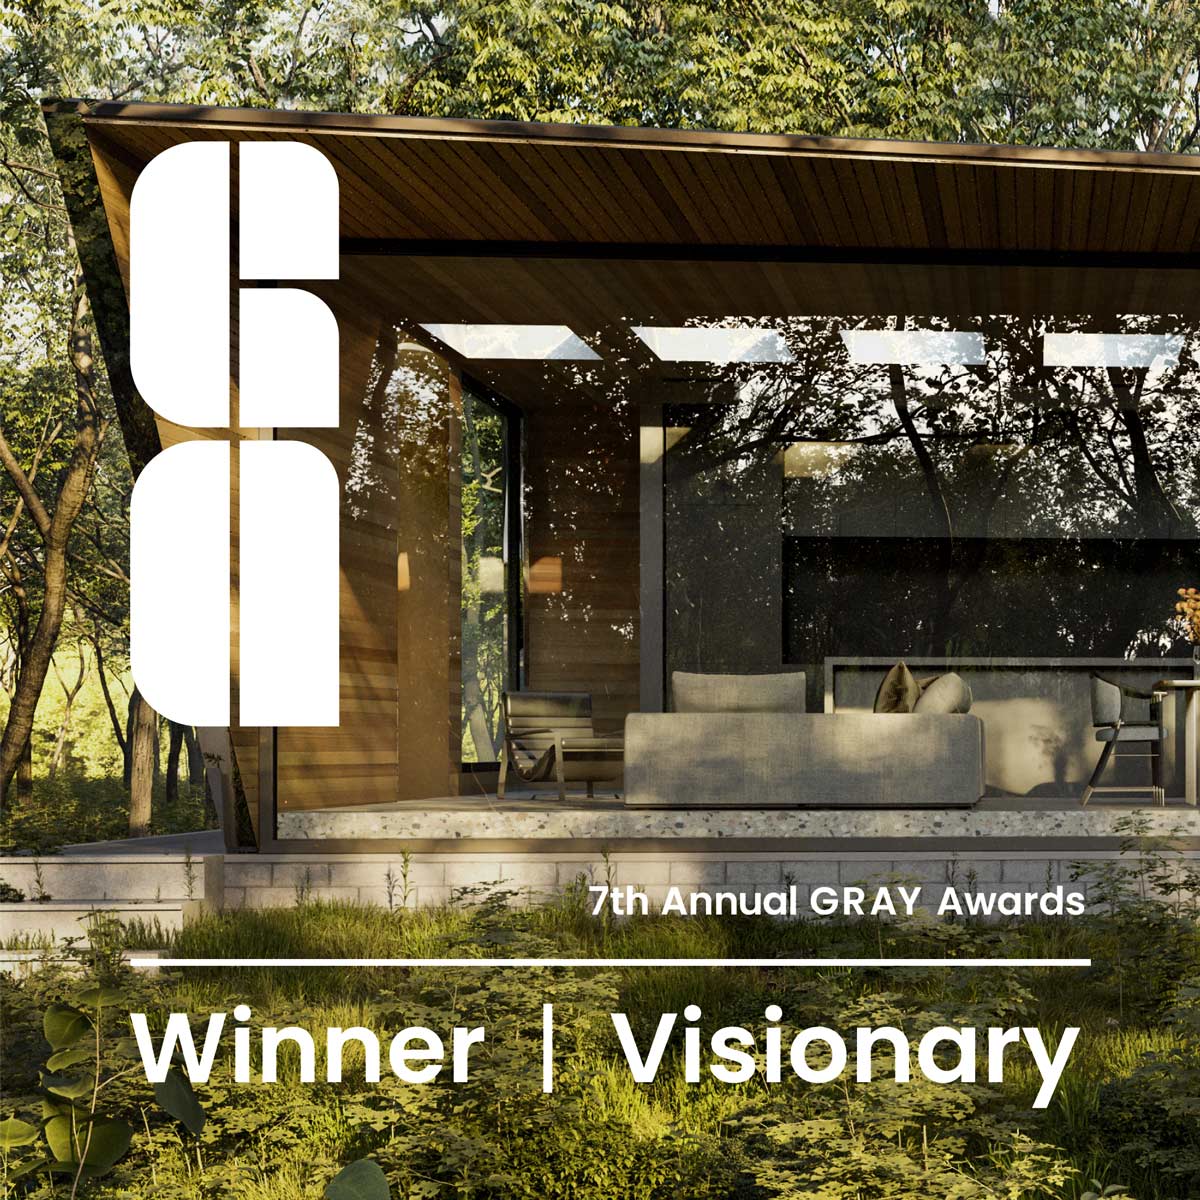 The Up Studio wins Gray Magazine's Award for Visionary Category